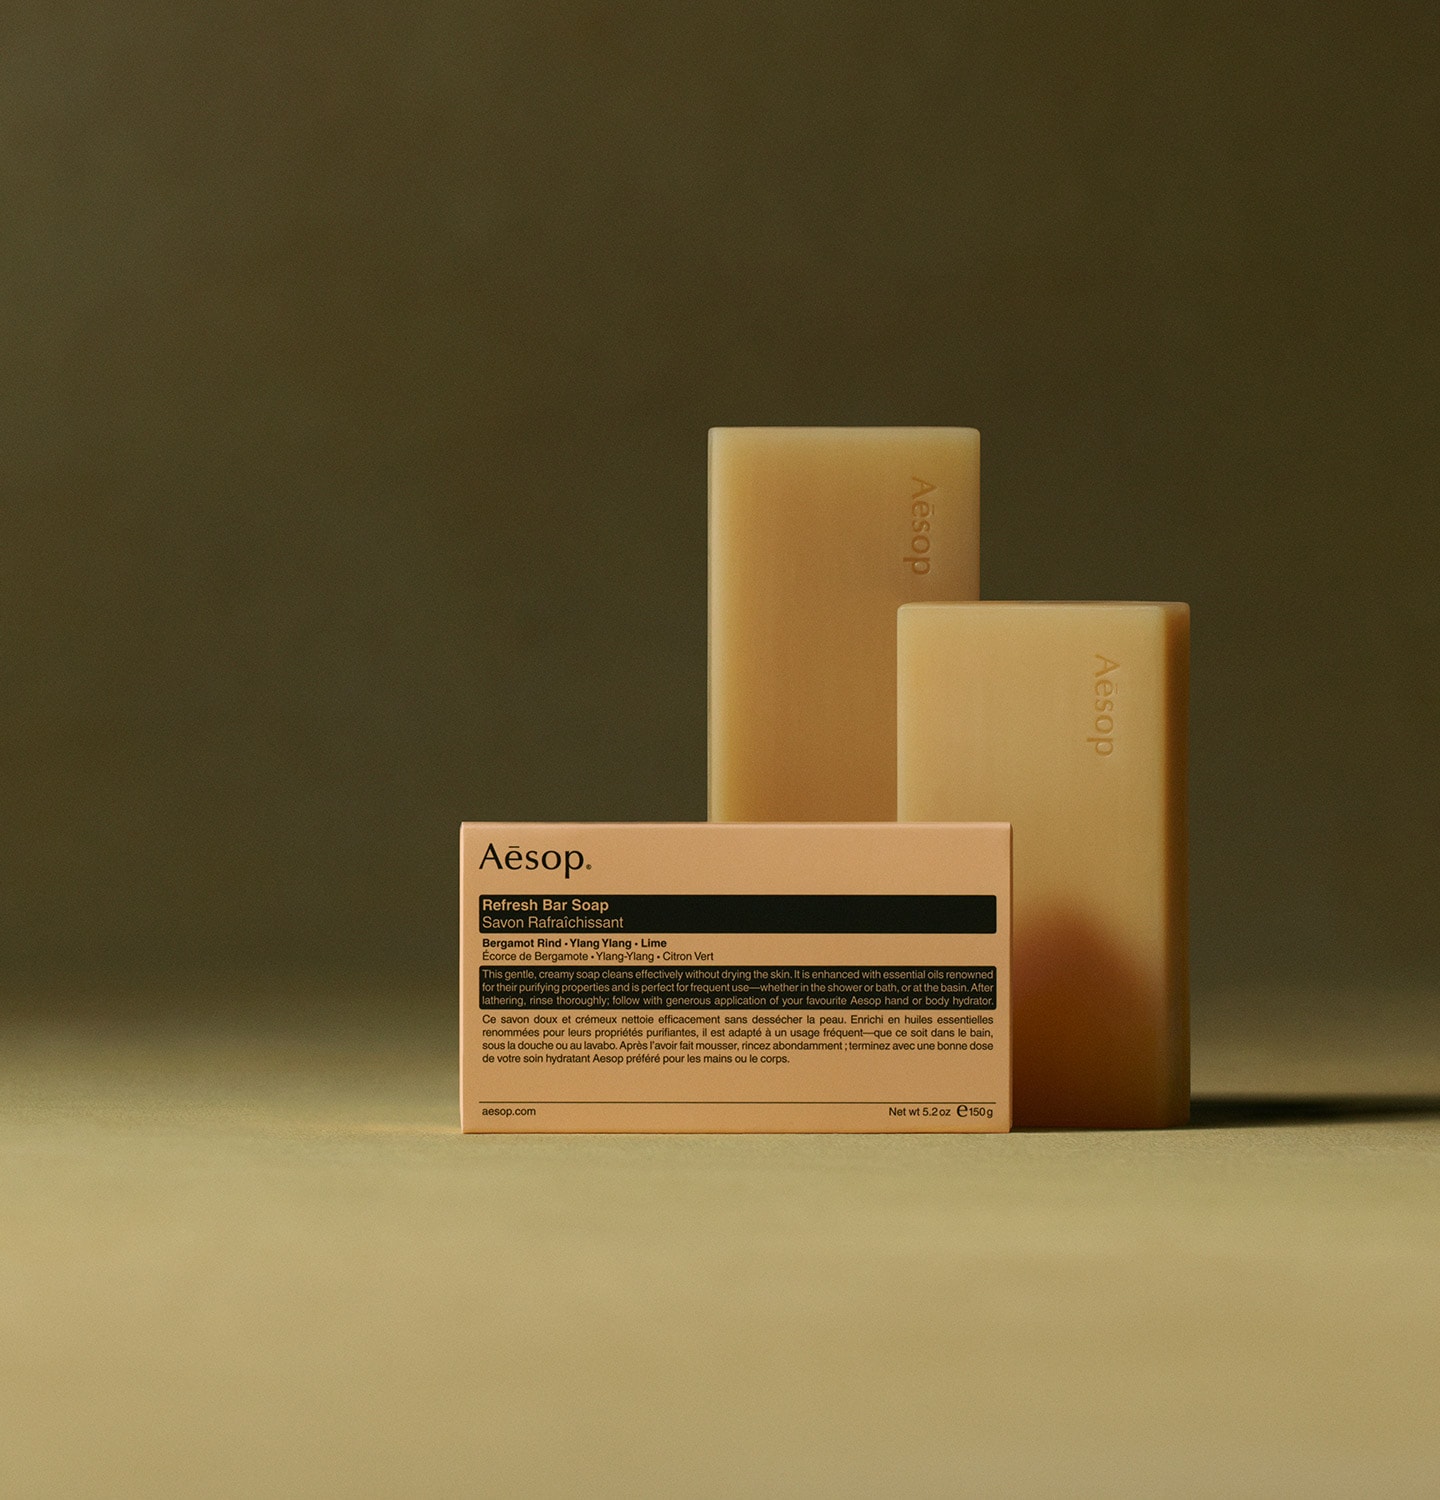 Aesop Refresh bar soaps placed horizontally behind the packaging in textured dark green background